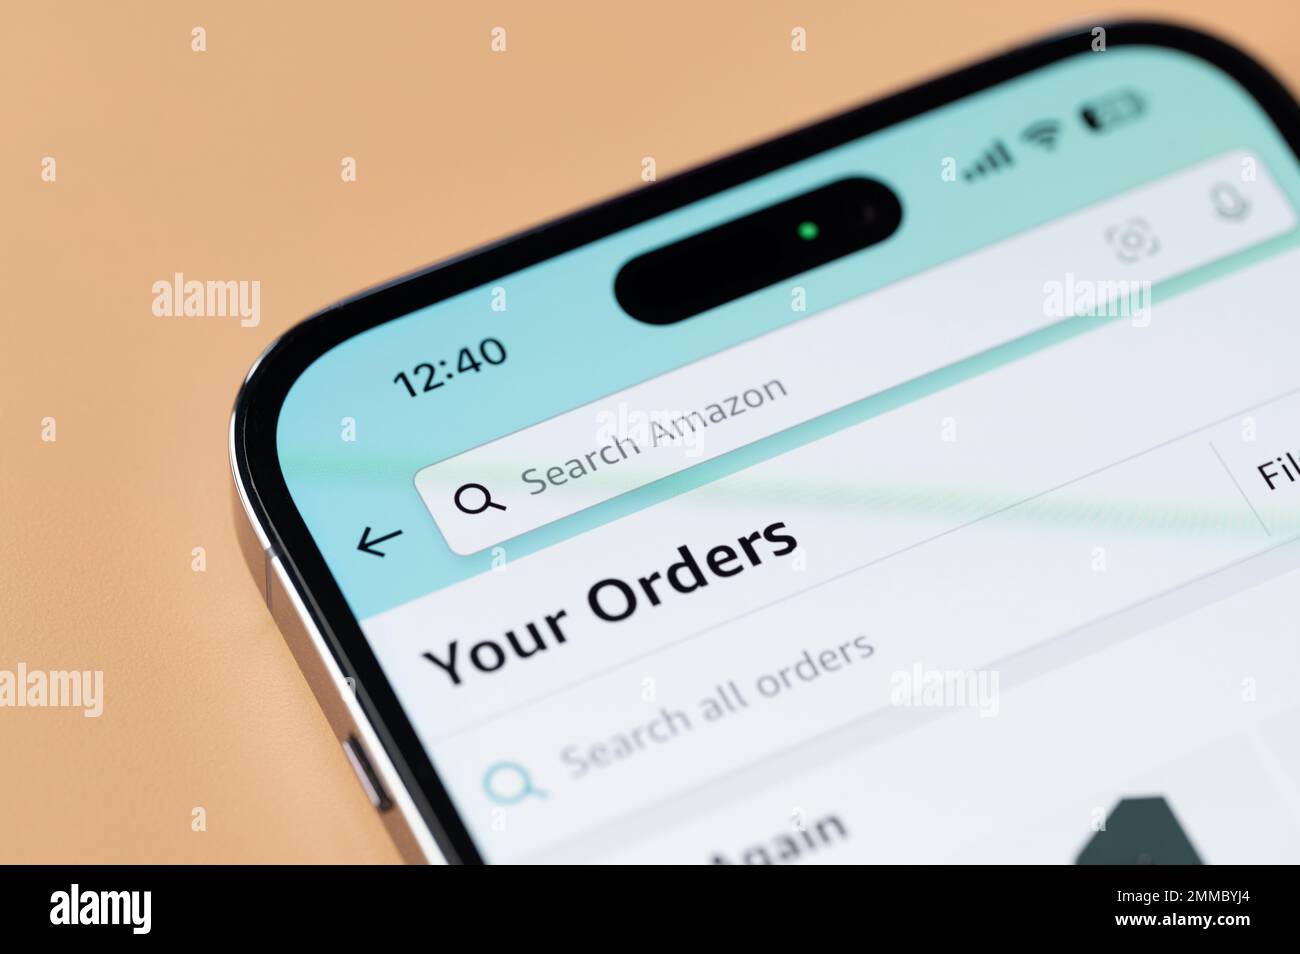 New york, USA - January 28, 2022: Checking orders in amazon shopping on iphone 14 pro in smartphone screen close up view Stock Photo